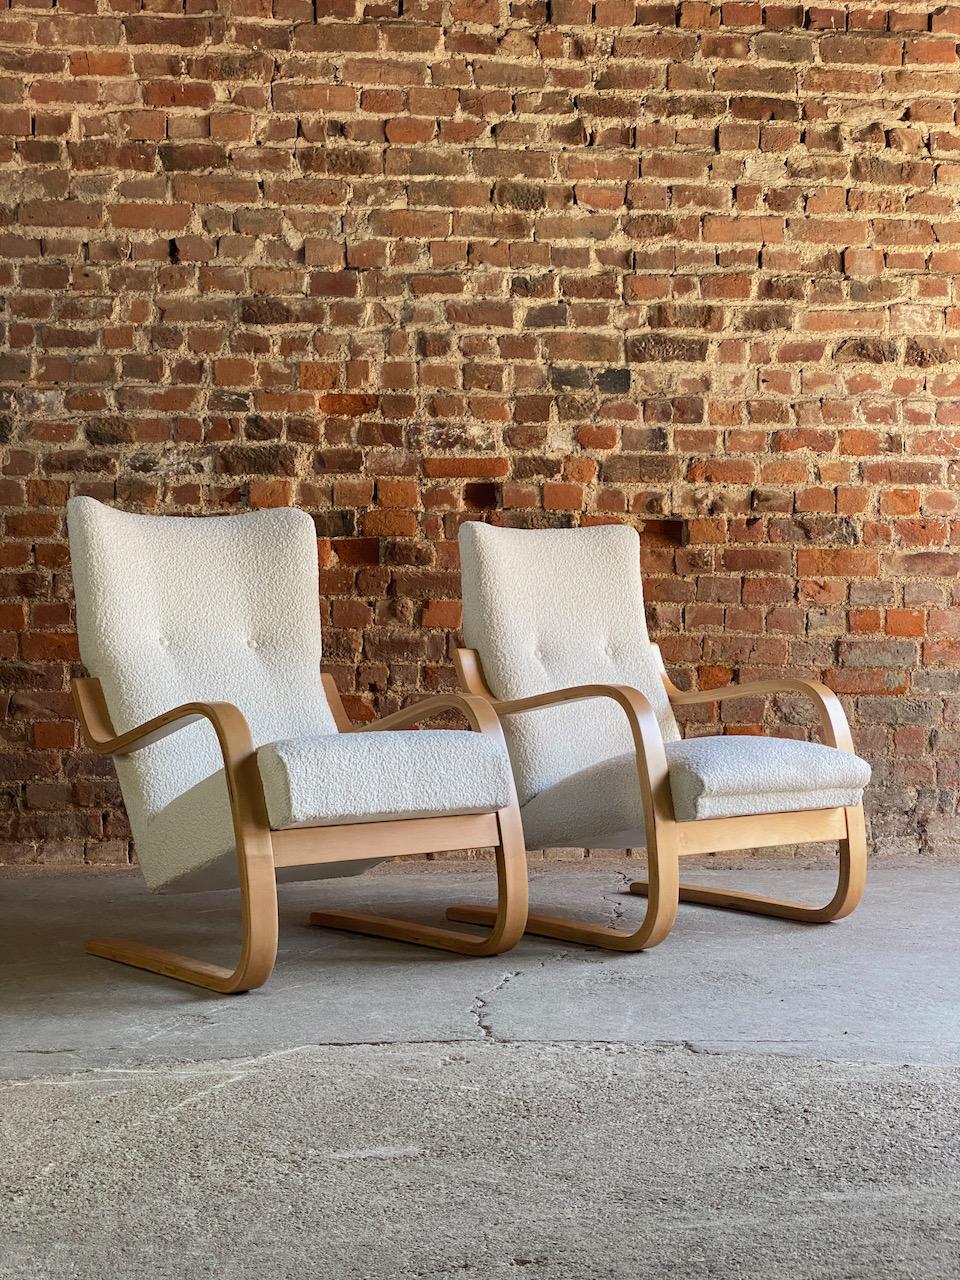 Alvar Aalto Model 401 lounge chair in Bouclé Finland Circa 1938 No: 2

Alvar Aalto Model 401 lounge chair Finland Circa 1938, the cantilevered birch ’S' shaped frame upholstered in white Bouclé upholstery, early original version pre added 'ears'